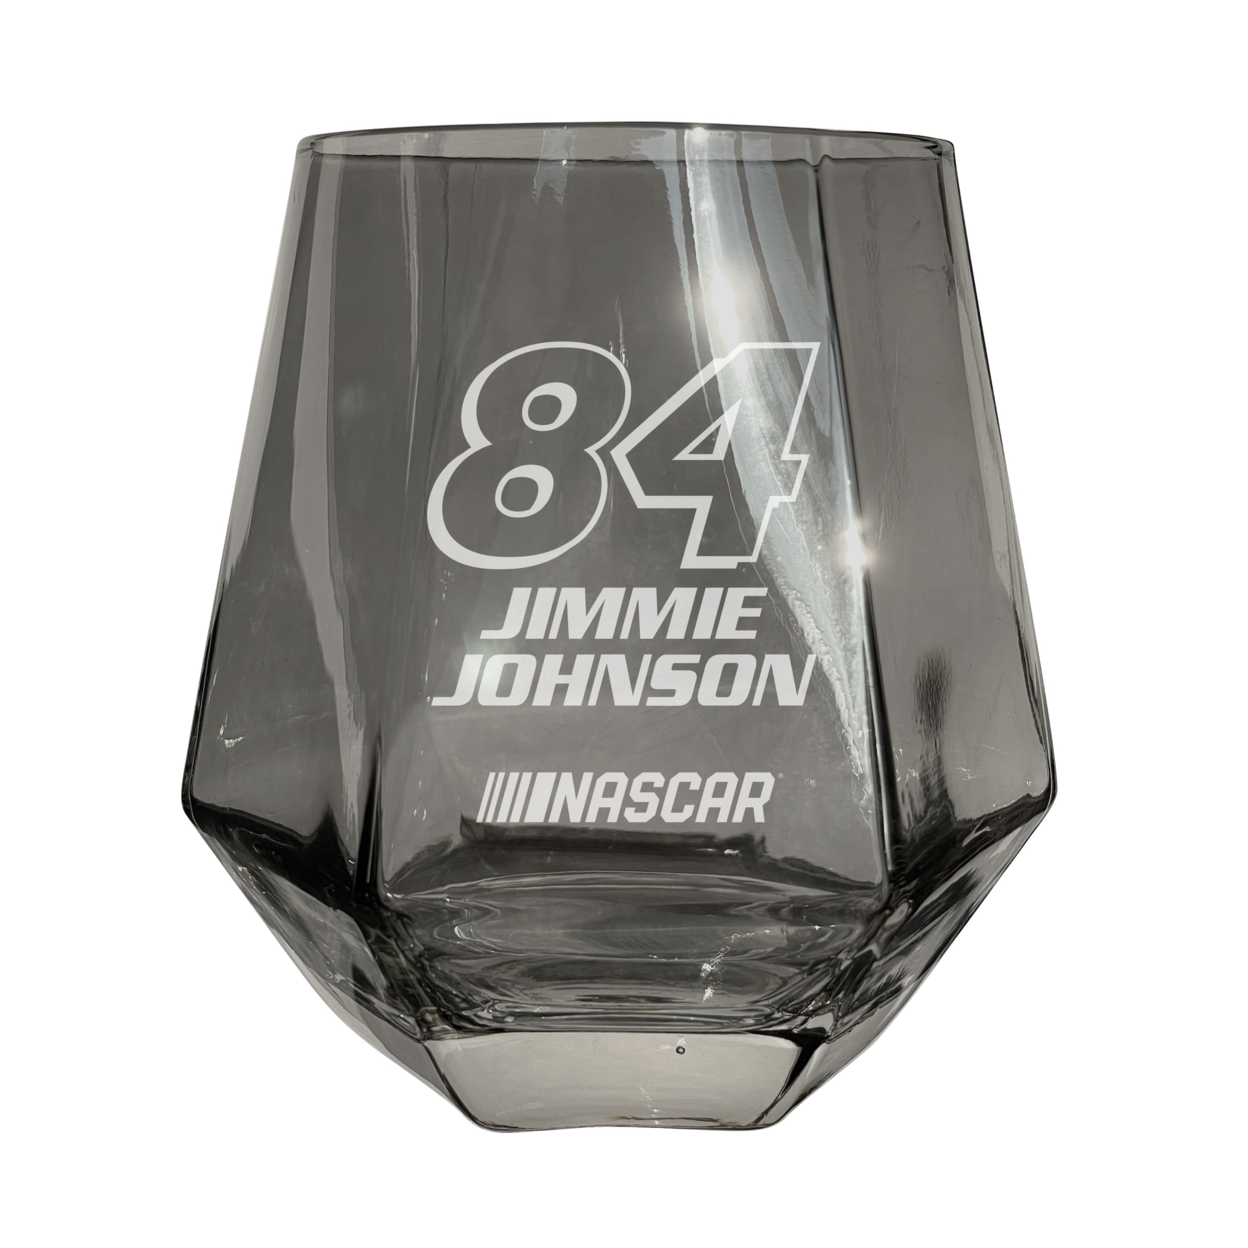 #84 Jimmie Johnson Officially Licensed 10 Oz Engraved Diamond Wine Glass - Clear, Single